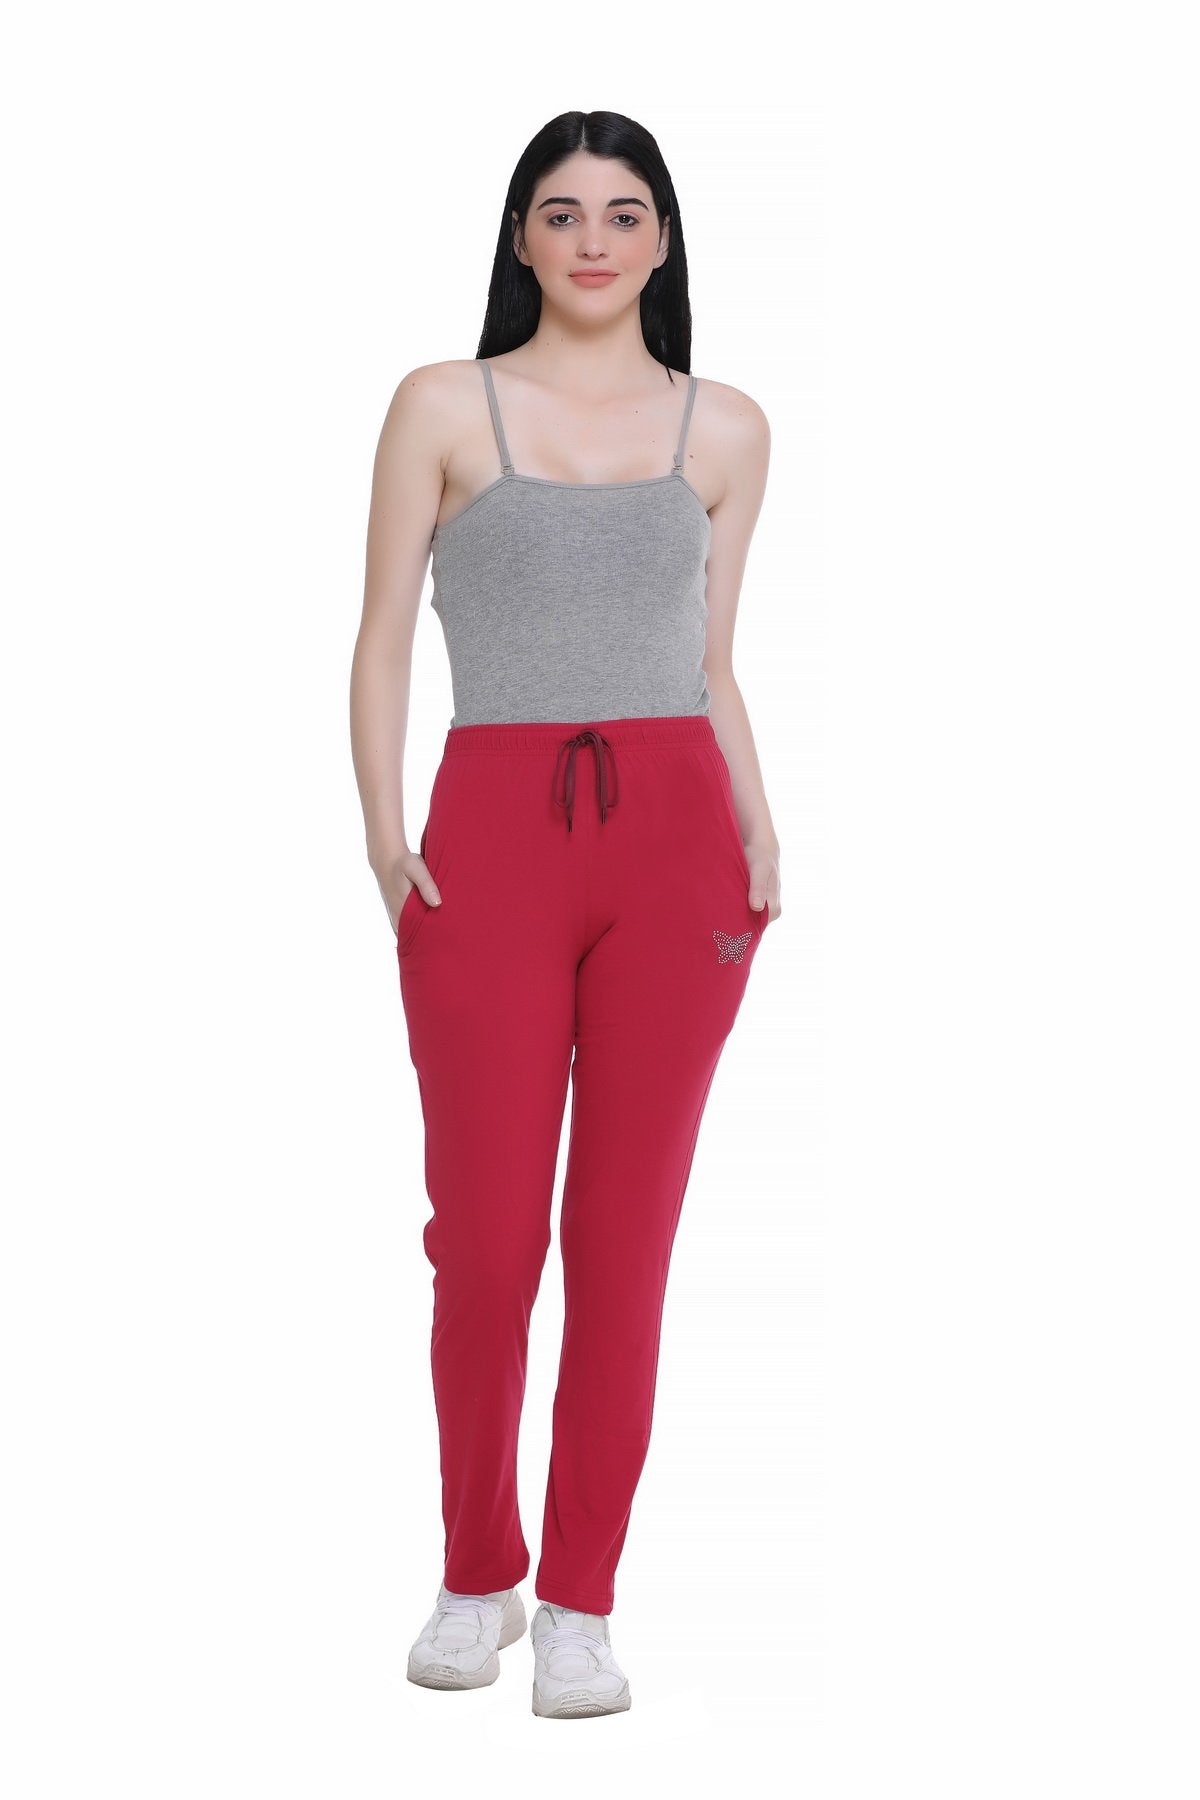 Comfy Maroon Cotton Track Pants For Women At Best Prices